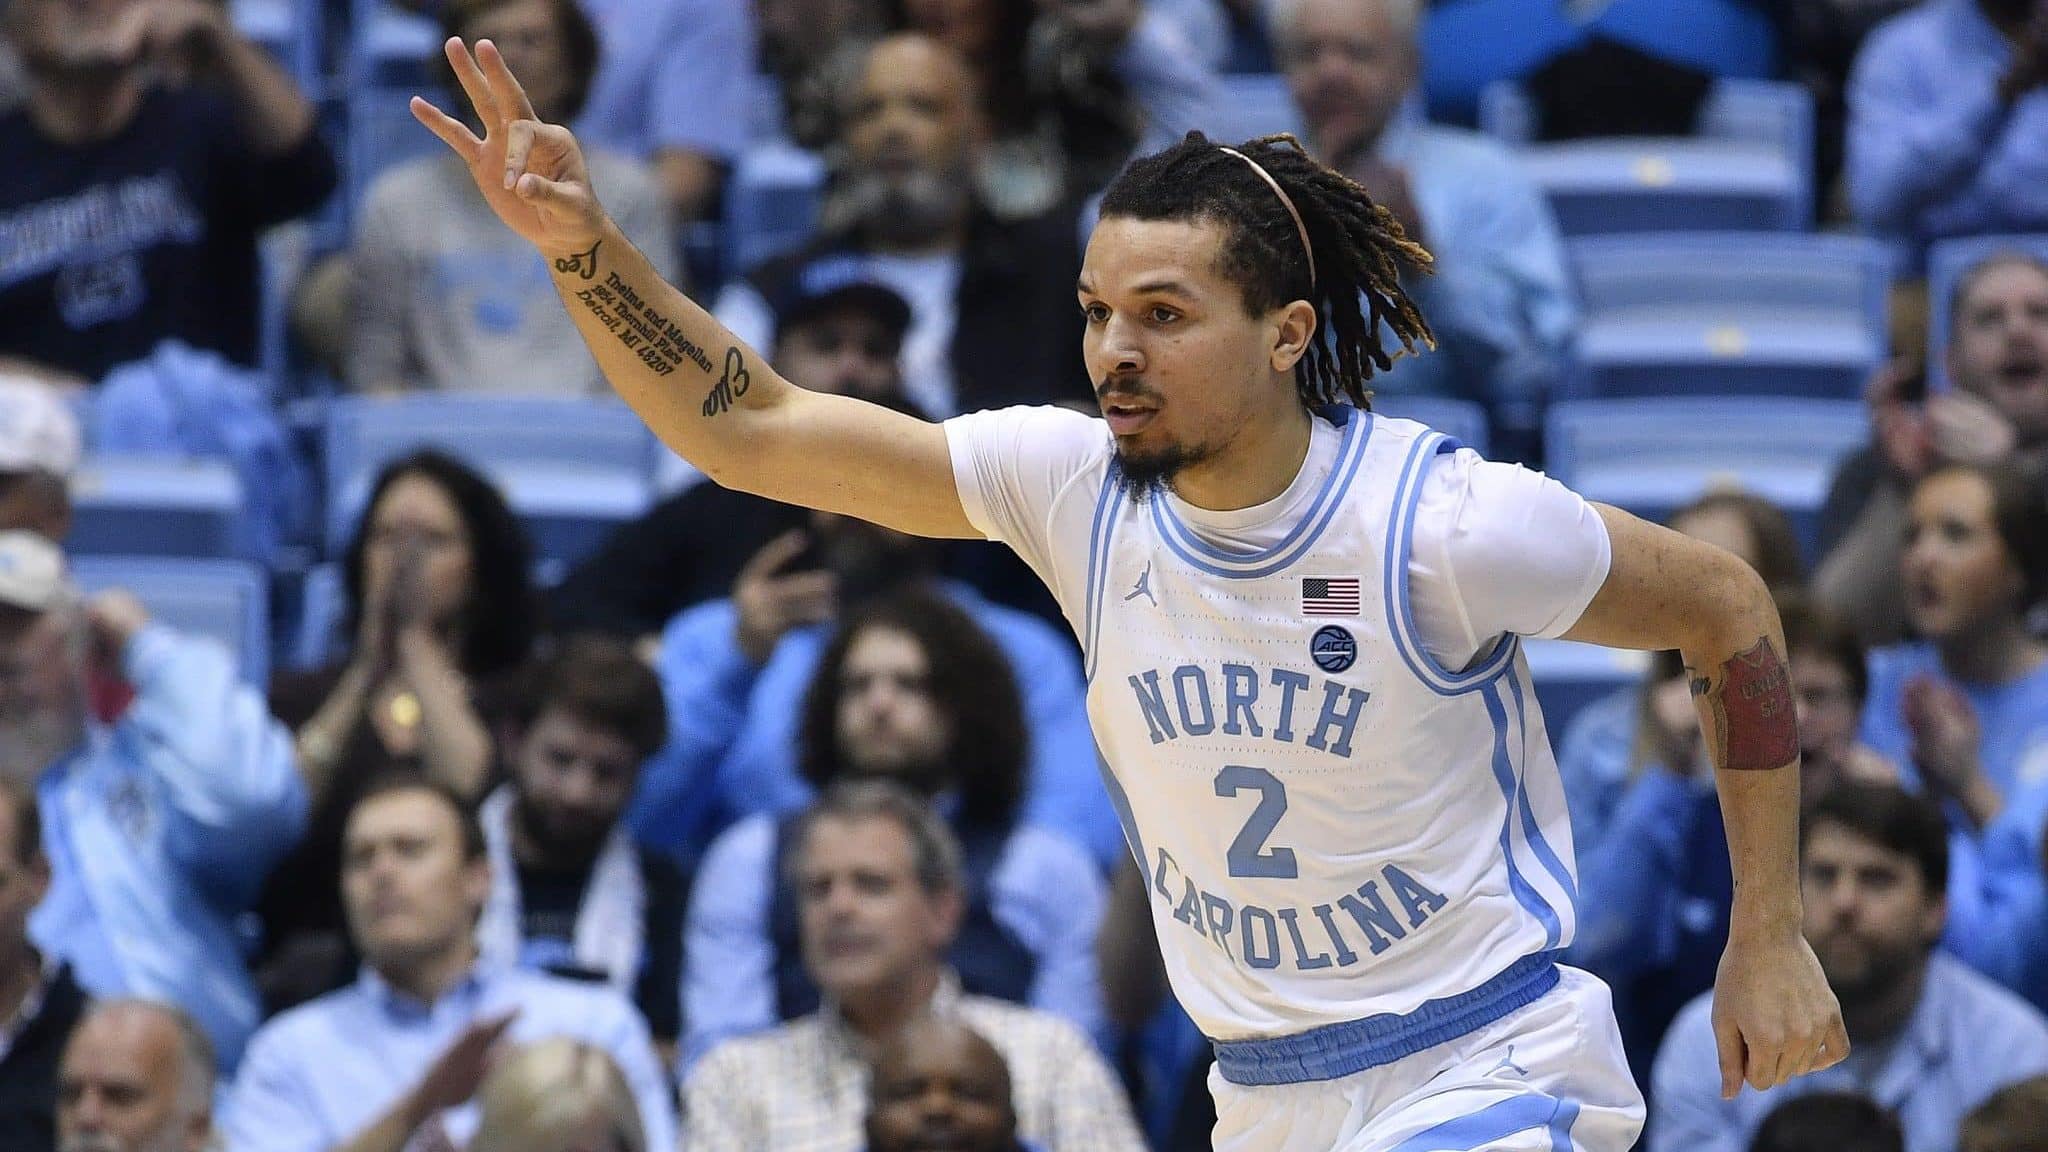 CHAPEL HILL, NORTH CAROLINA - MARCH 03: Cole Anthony #2 of the North Carolina Tar Heels reacts after making a three-point basket against the Wake Forest Demon Deacons during the first half of their game at the Dean Smith Center on March 03, 2020 in Chapel Hill, North Carolina.